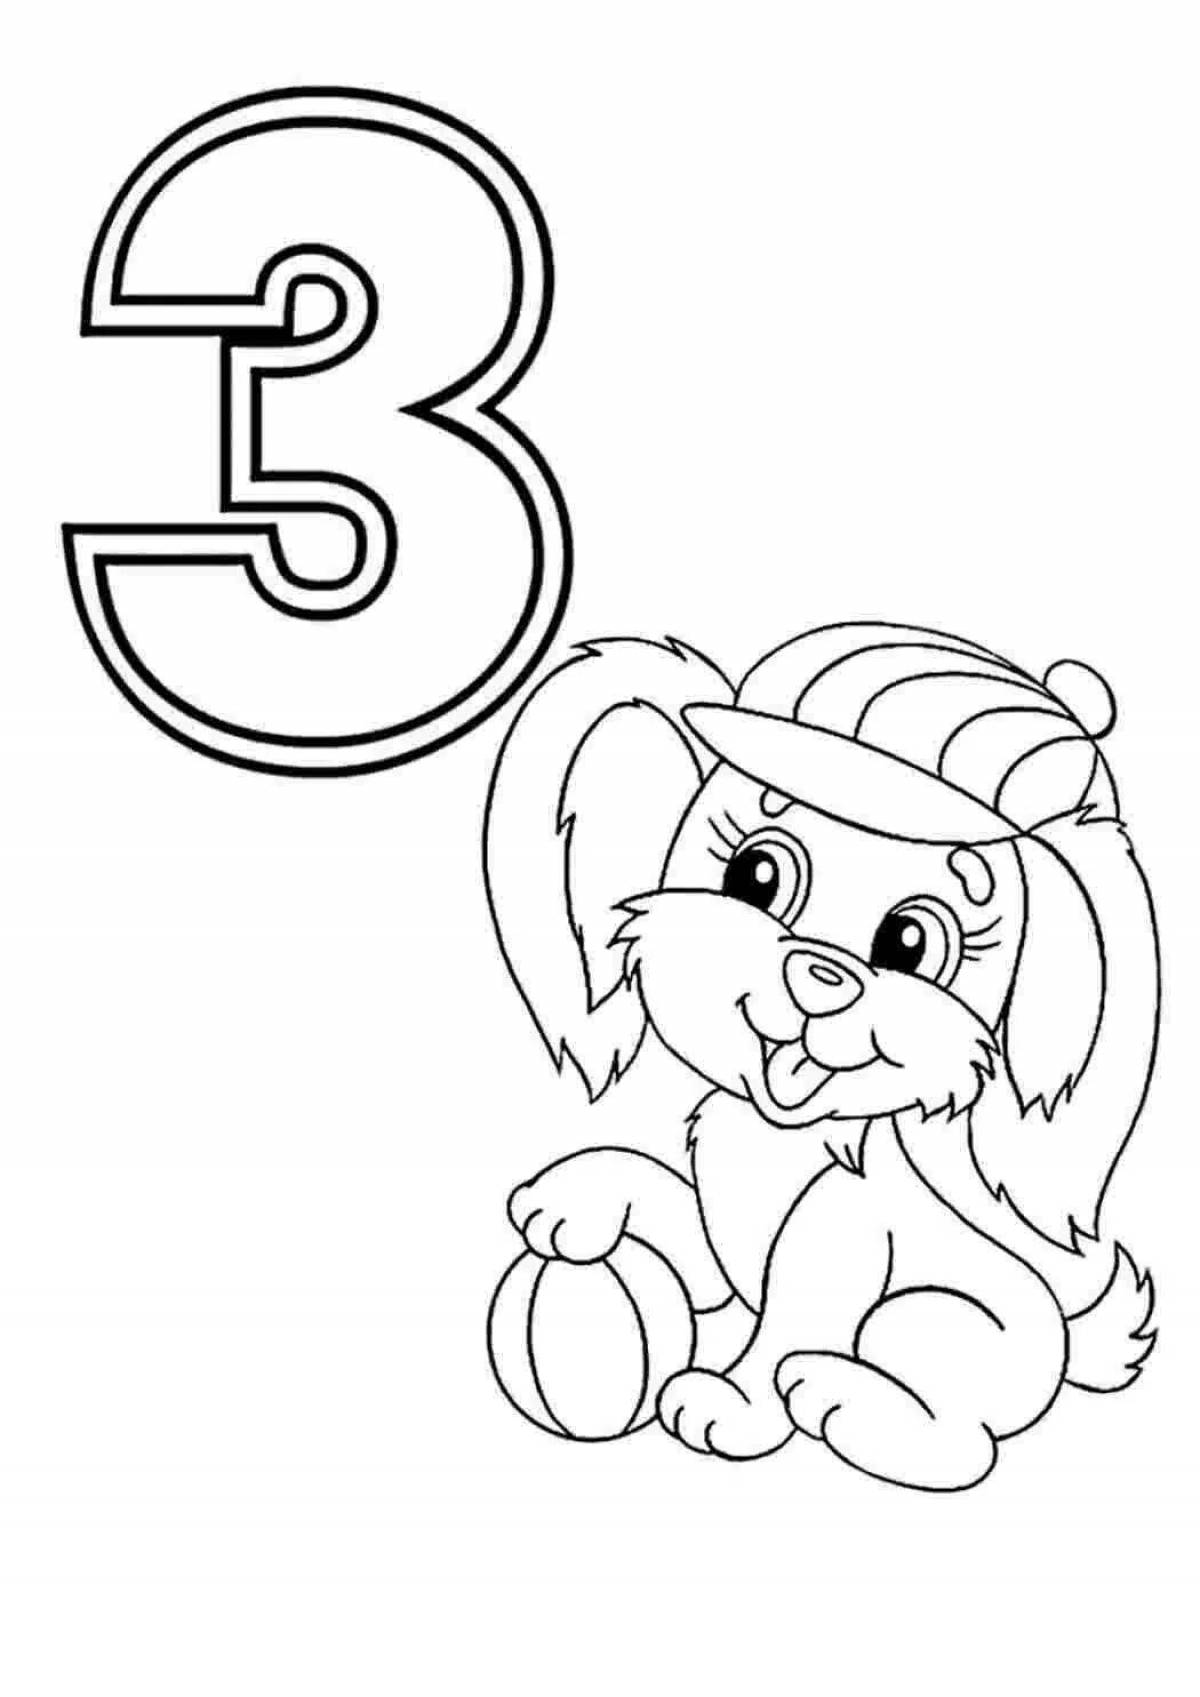 Amazing coloring book for girls with letters